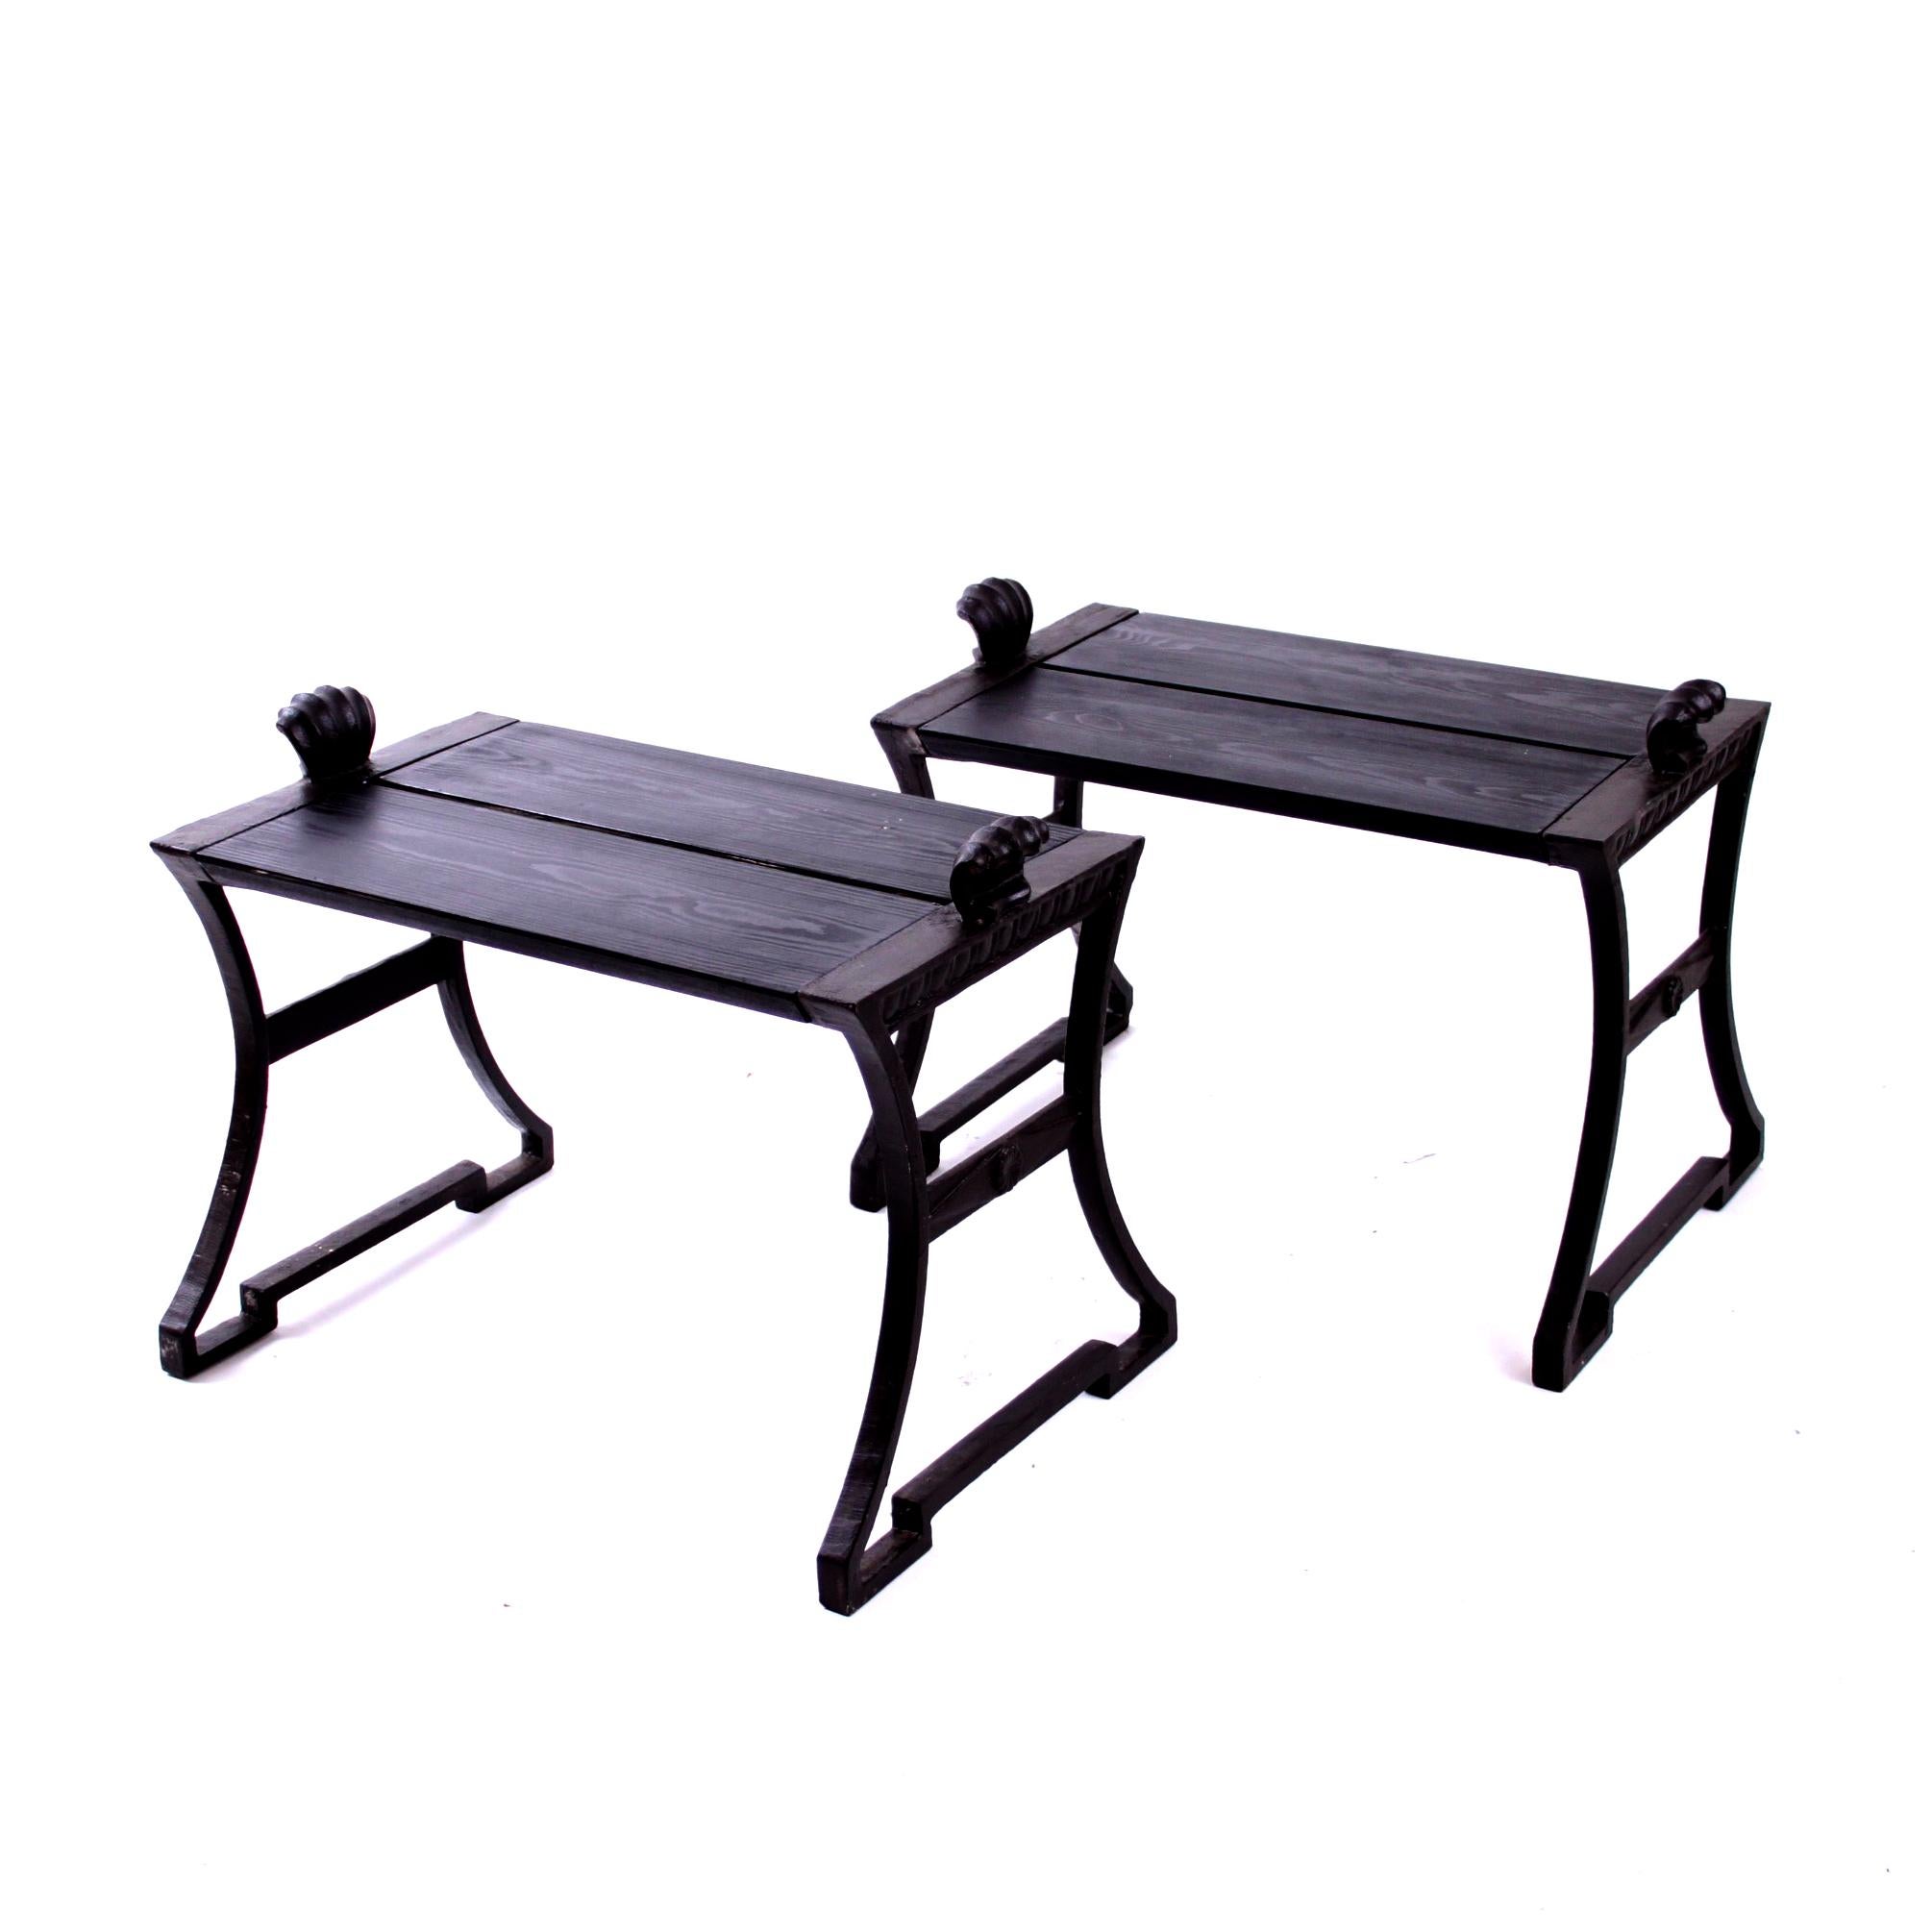 Pair of Folke Bensow Benches, Dessin Park Bench No. 1, Sweden In Good Condition For Sale In Copenhagen, DK